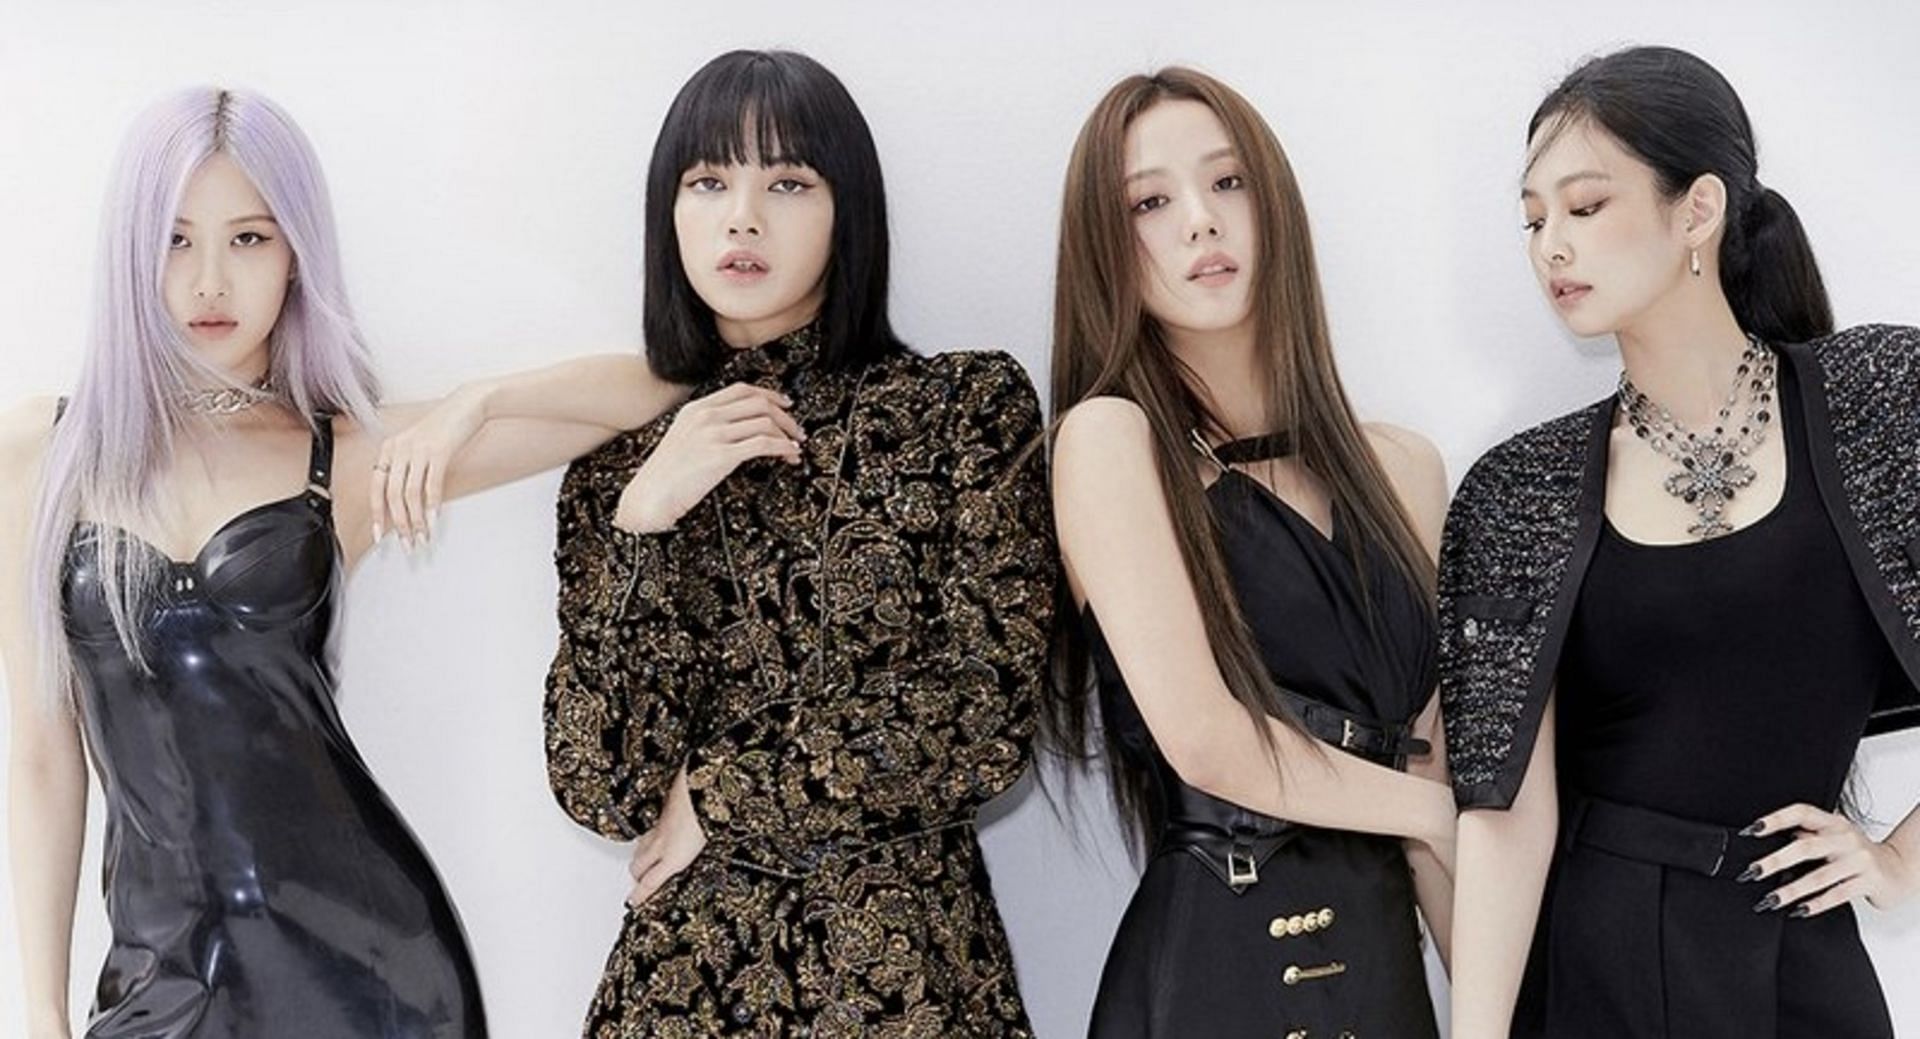 The K-pop girl group might be making a comeback soon (Image via Twitter/@BLACKPINK)